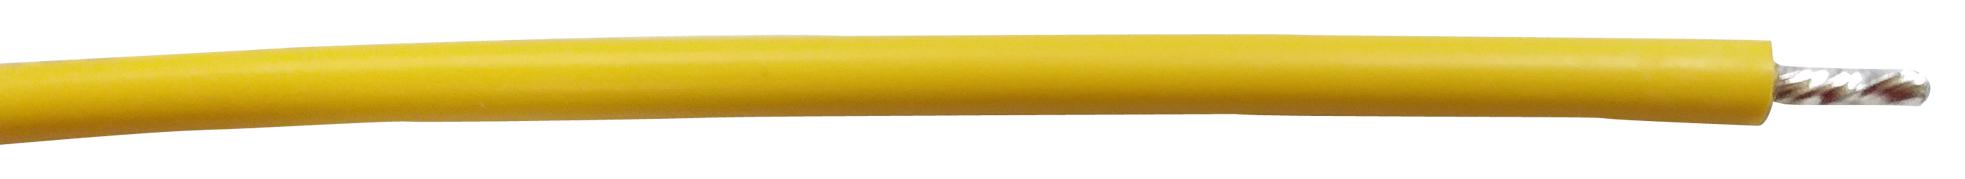 PP002424 HOOK-UP WIRE, 26AWG, YELLOW, 305M, 30V PRO POWER